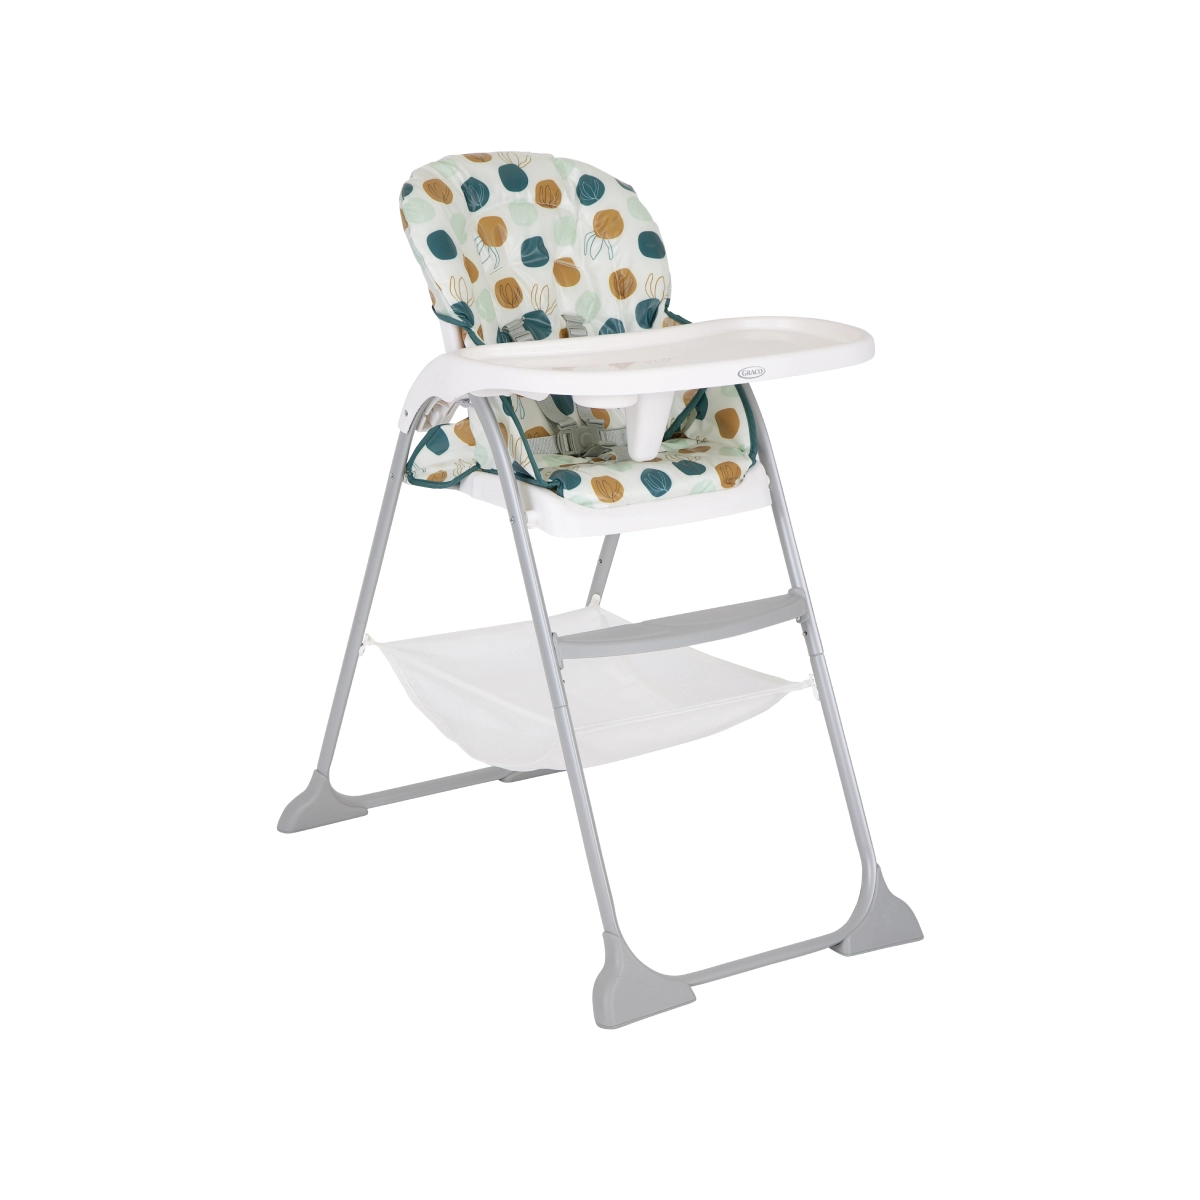 Graco SnackEase Quick Folding Highchair